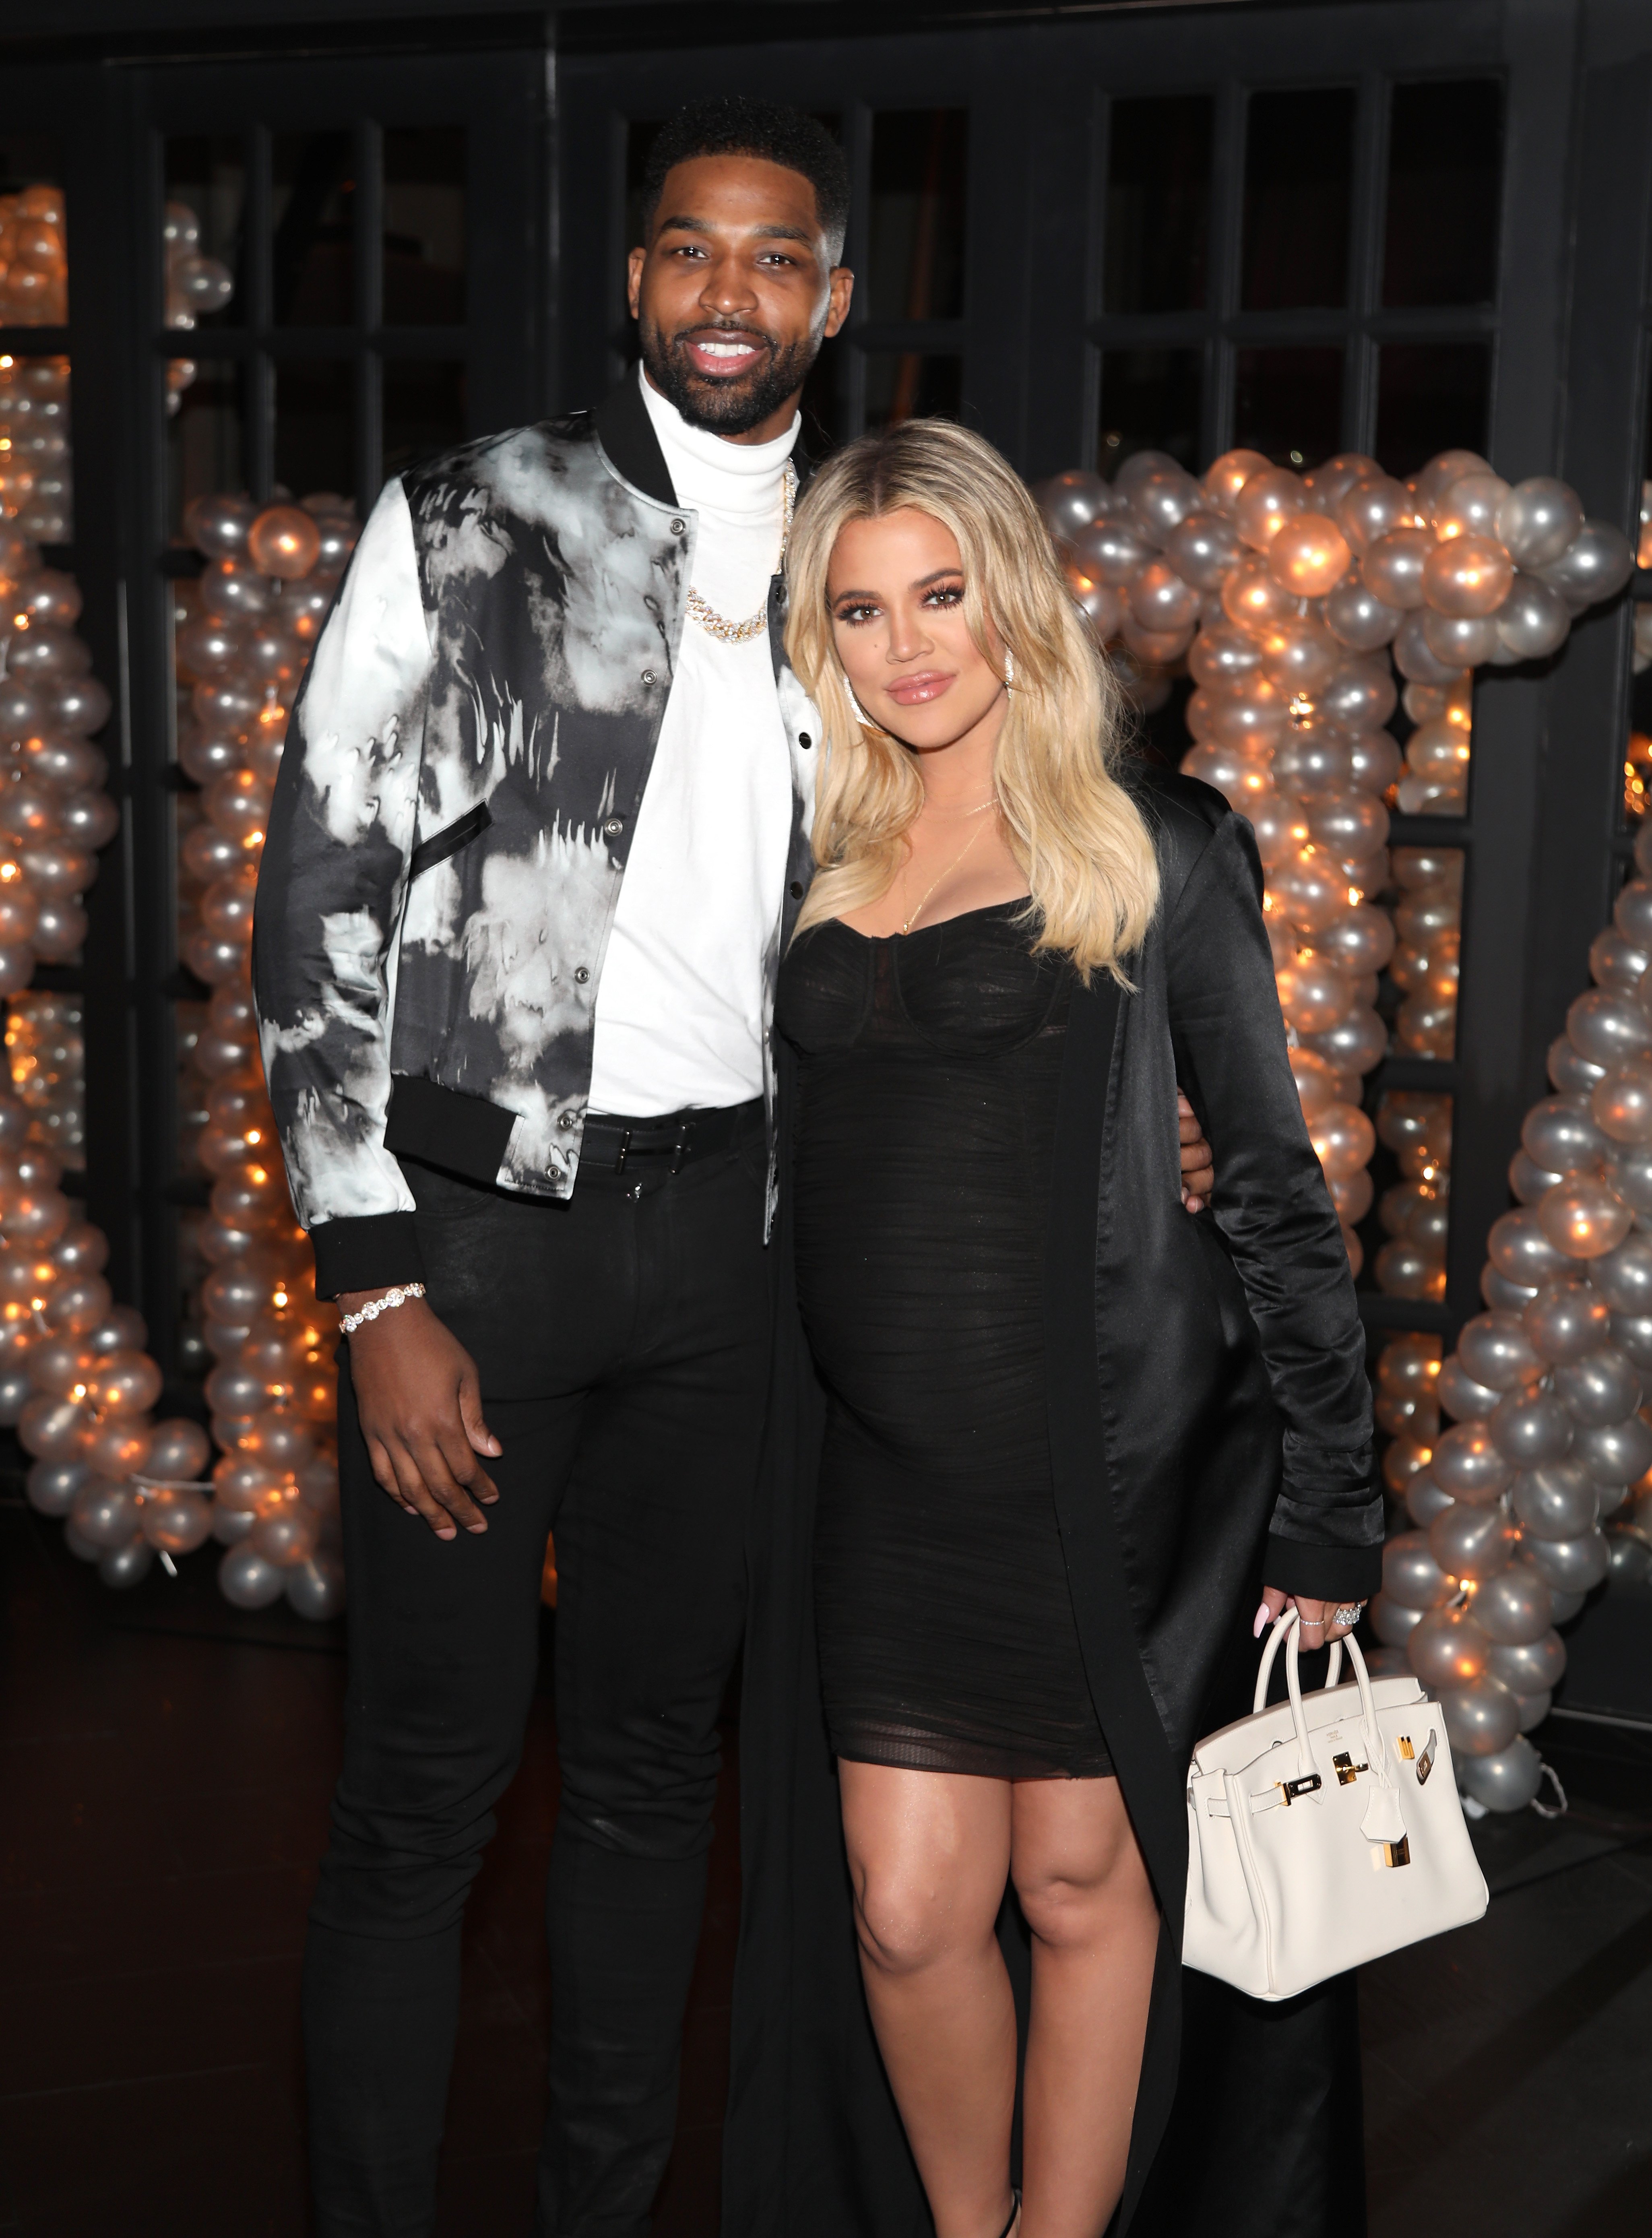 Tristan Thompson and Khloe Kardashian pose for a photo at the NBA player's birthday bash in 2018